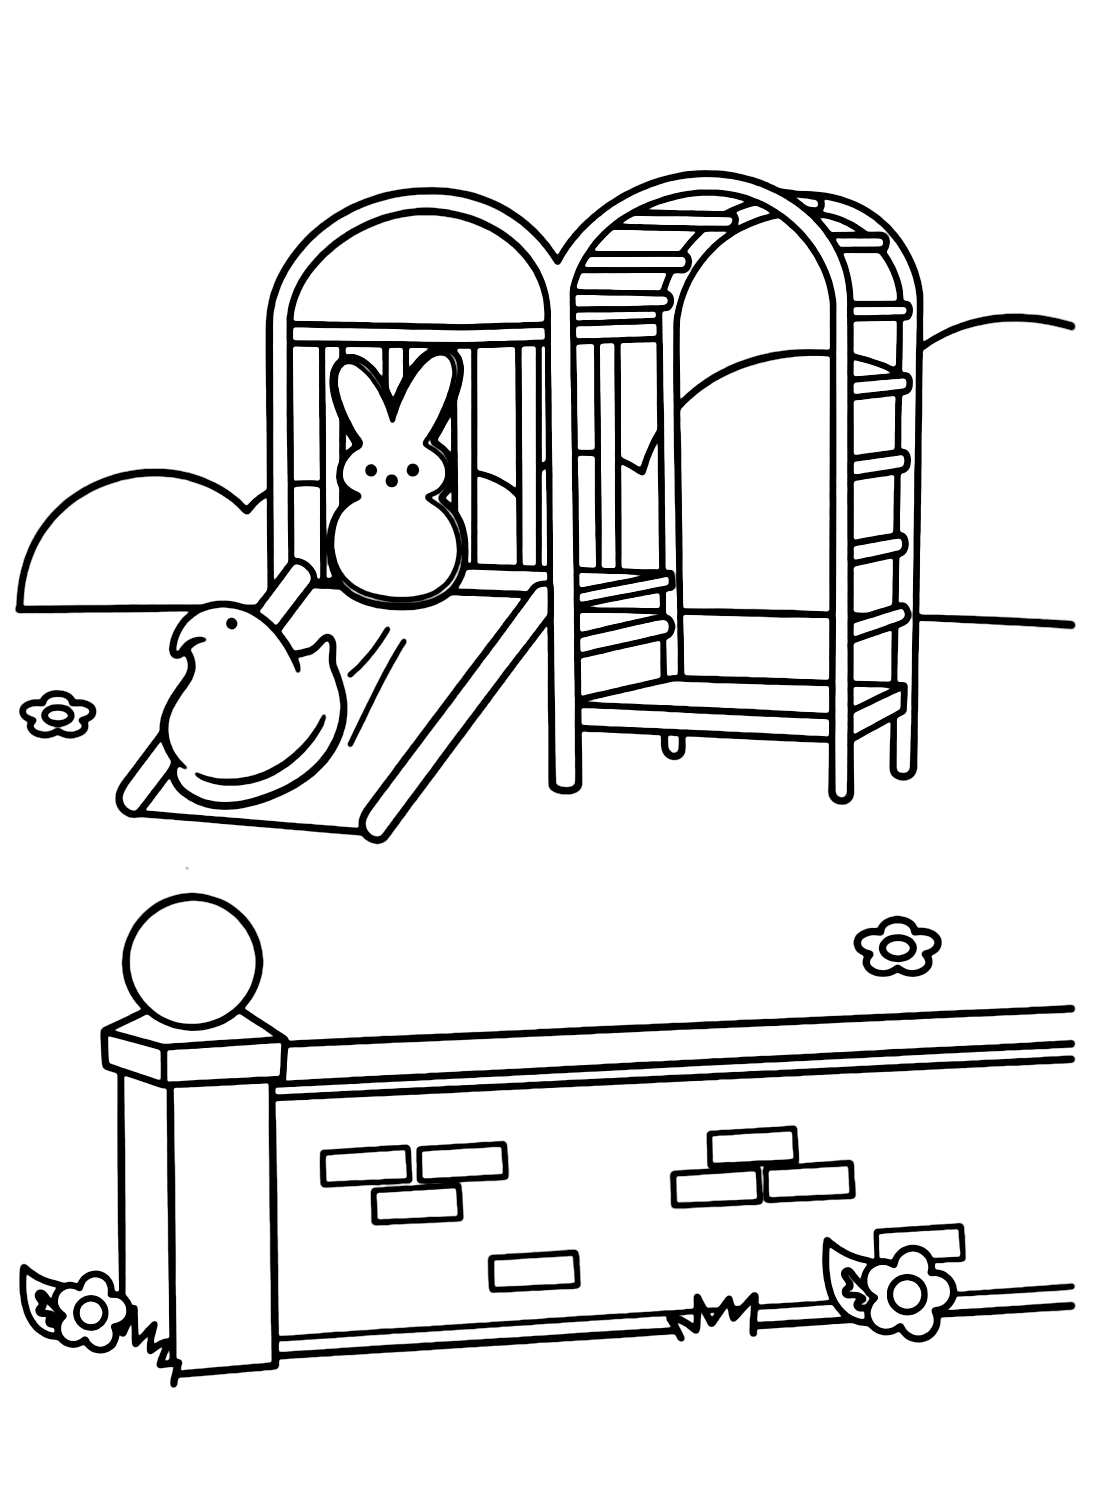 Bunny and Chick Peeps Coloring Page